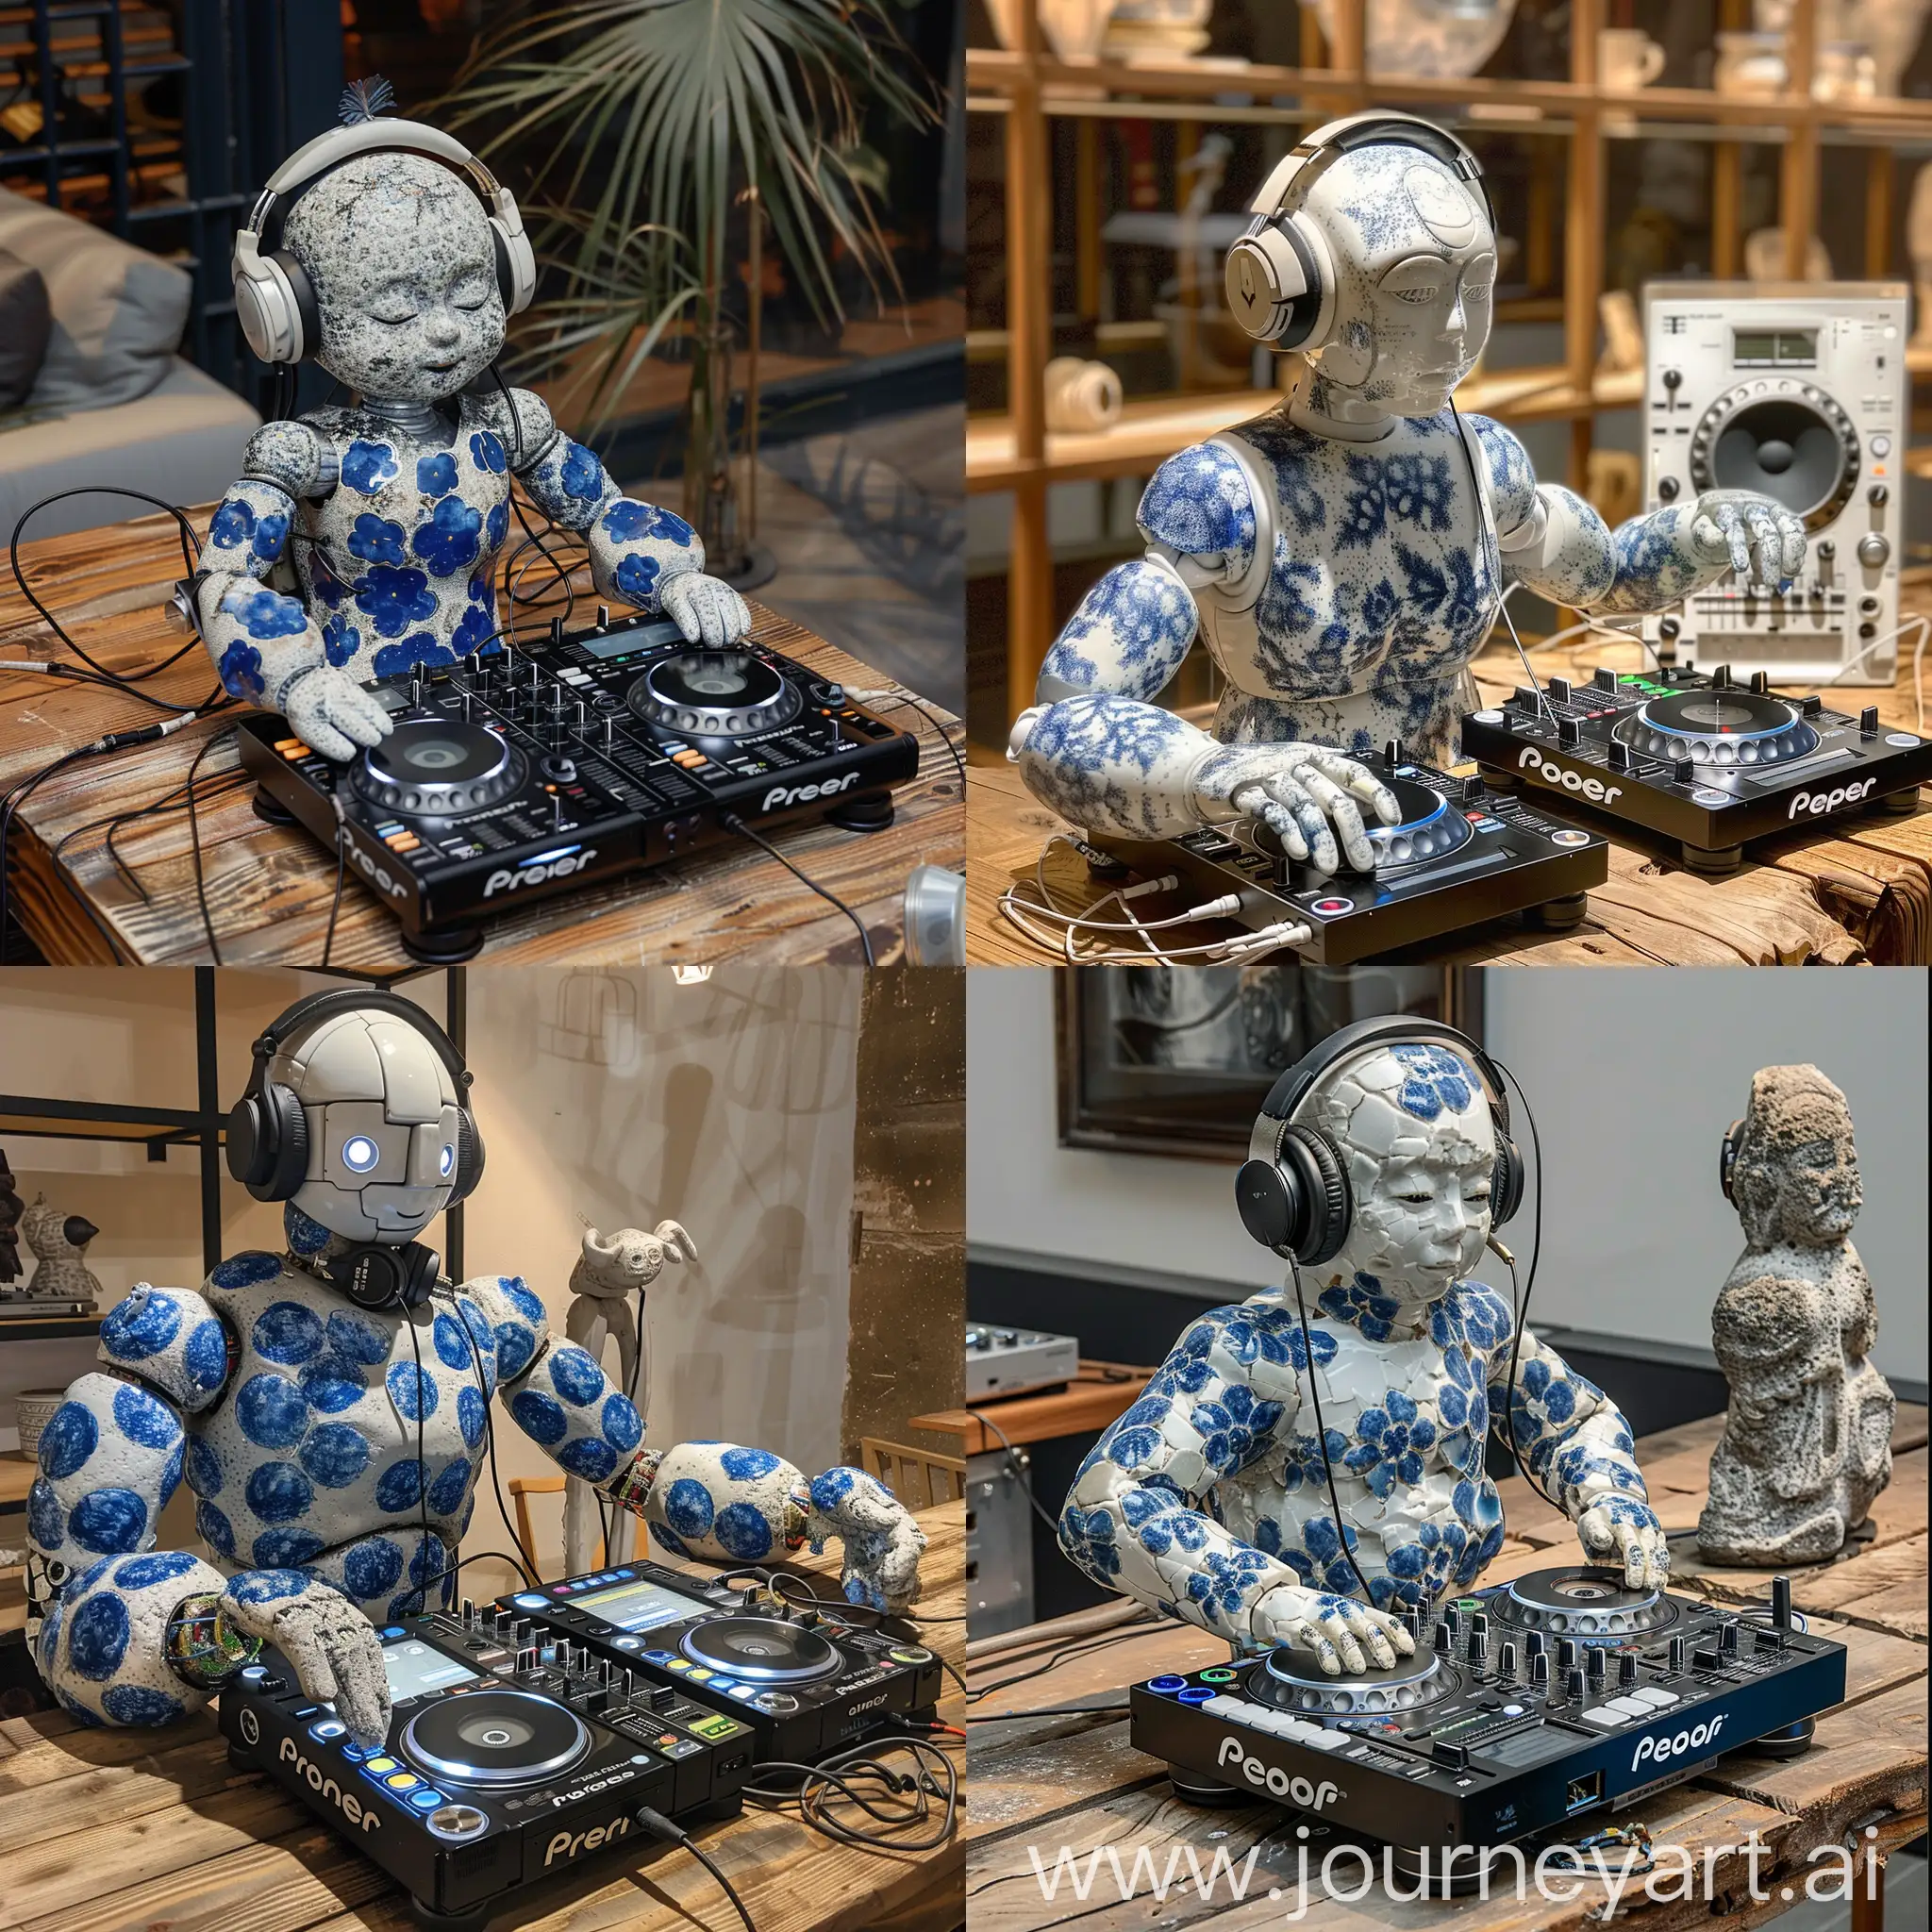 The private room of a DJ humanoid robot with a stone state made of ceramic and porcelain should be placed in a blue flower body design and with headphones on the head of the robot working with a dj pioneer device on a wooden table with a very realistic state.